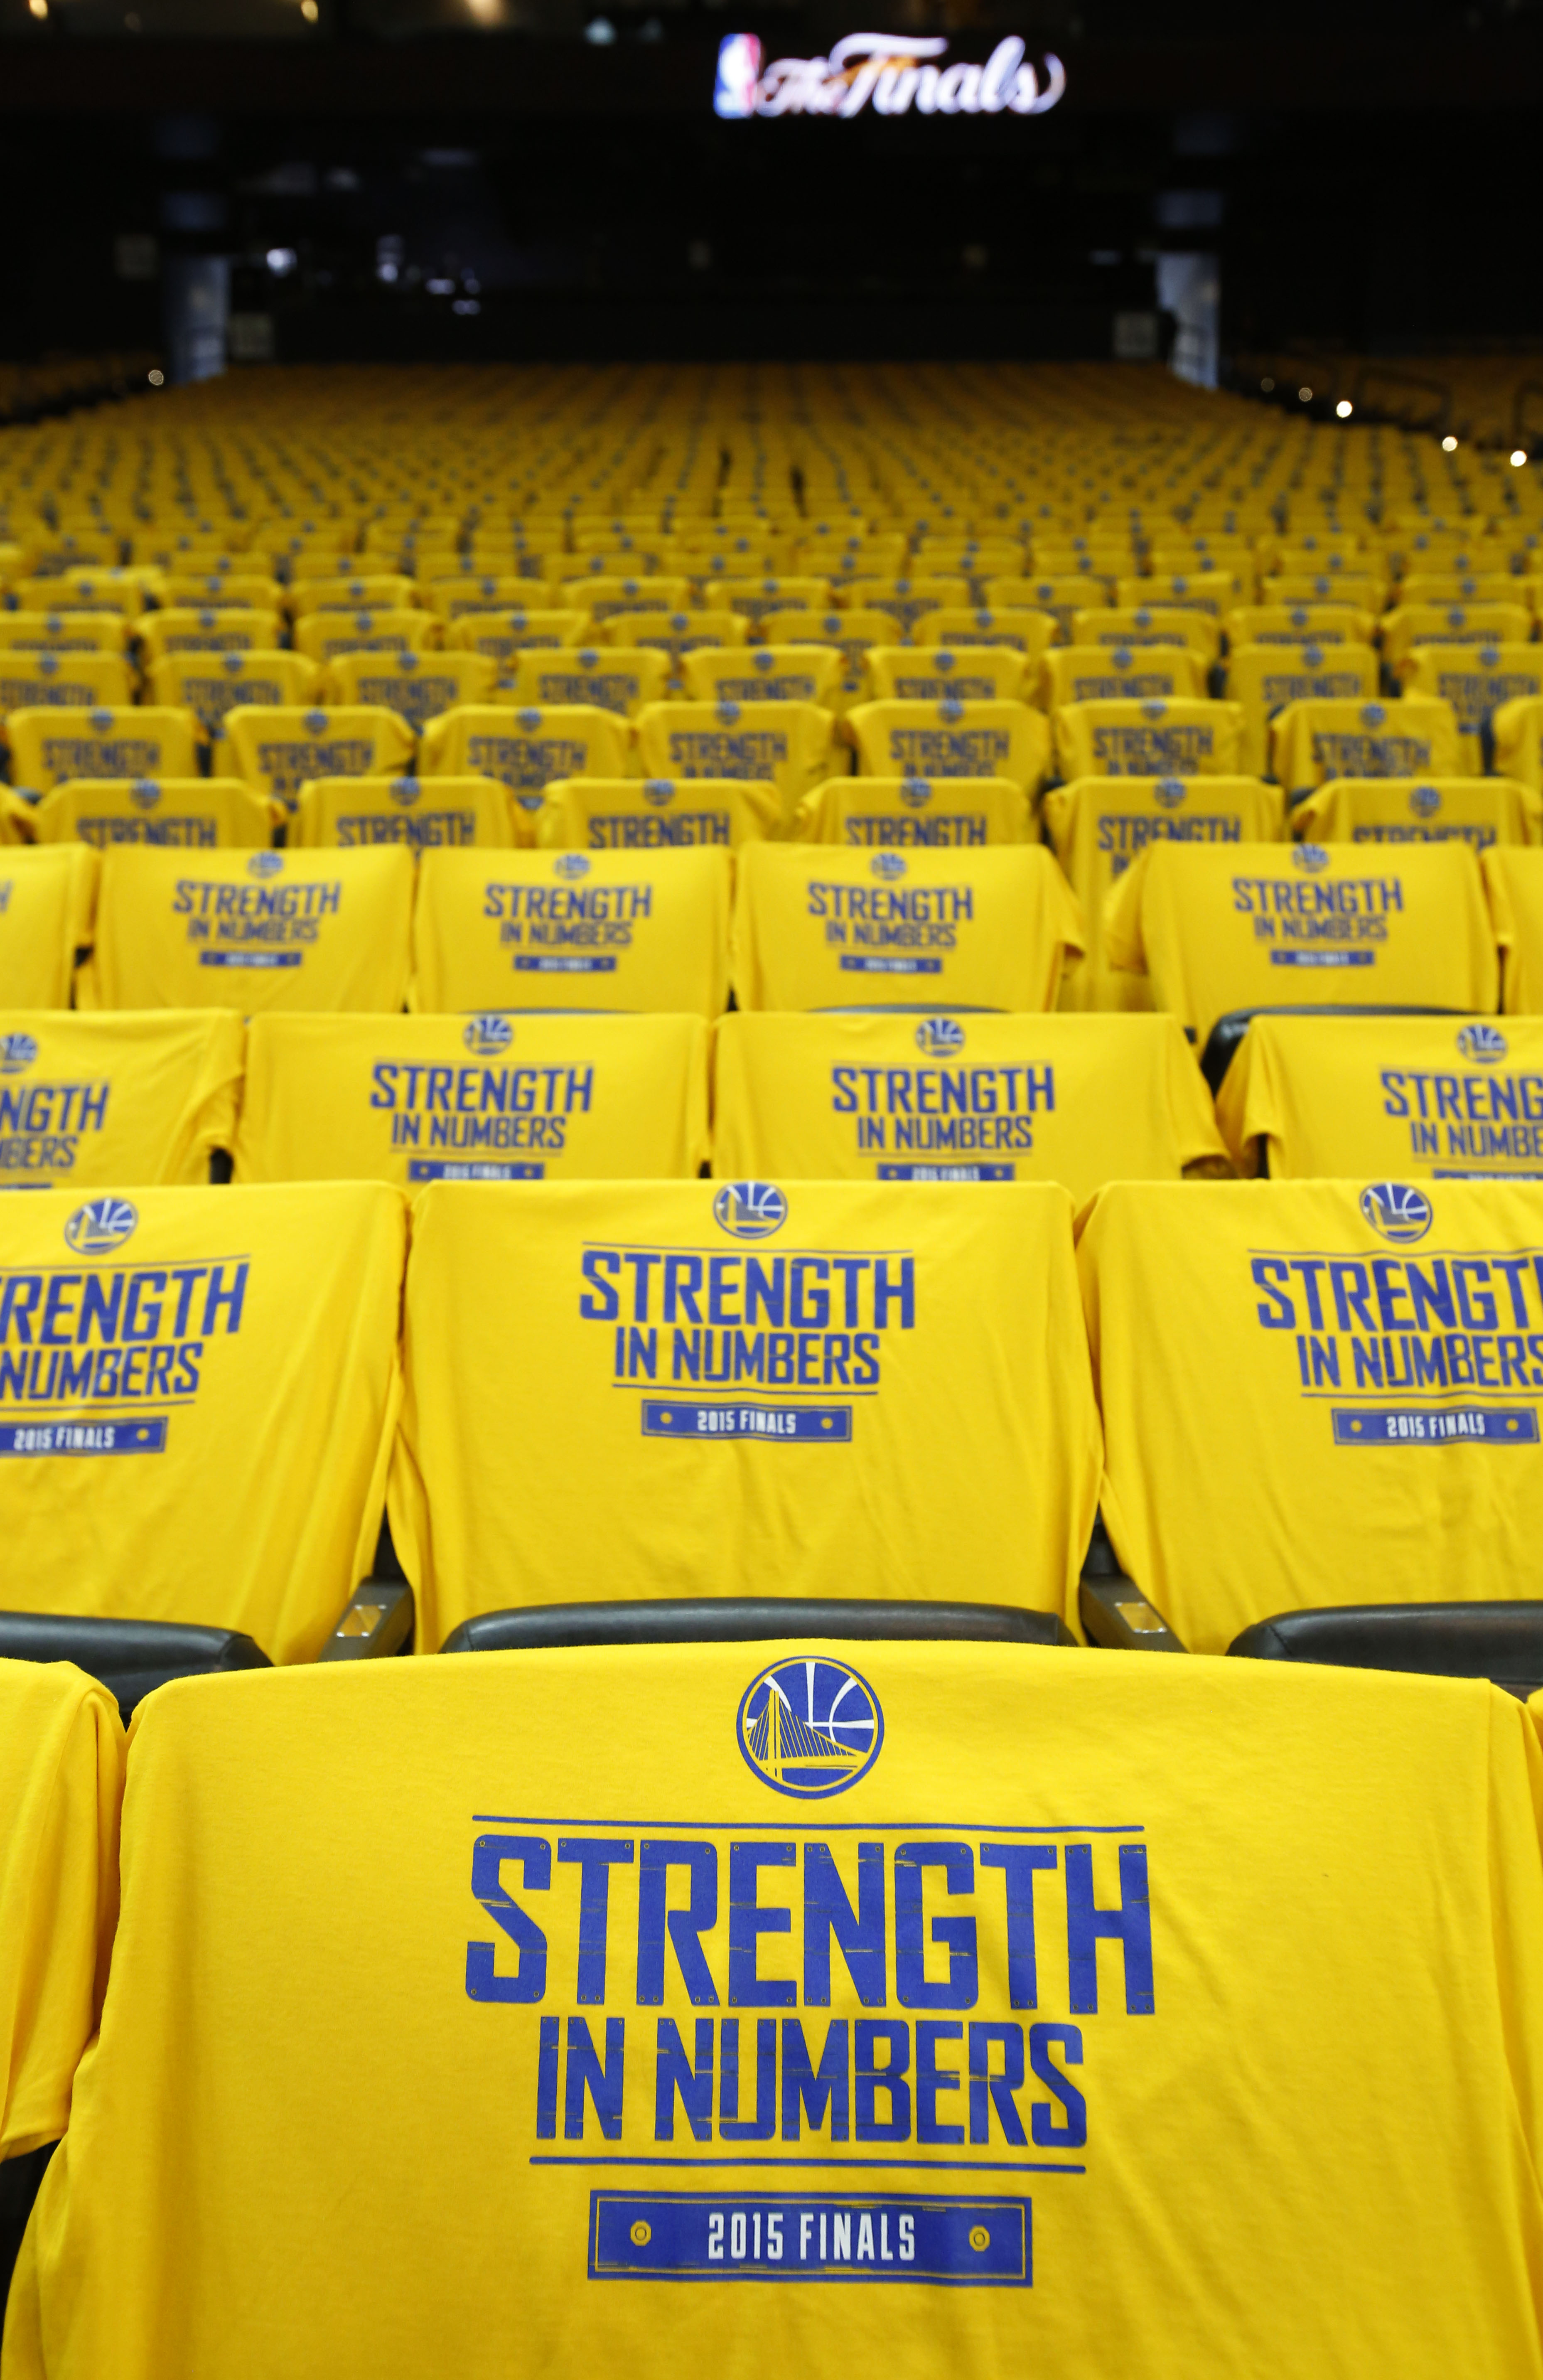 NBA Finals ticket prices will shock you